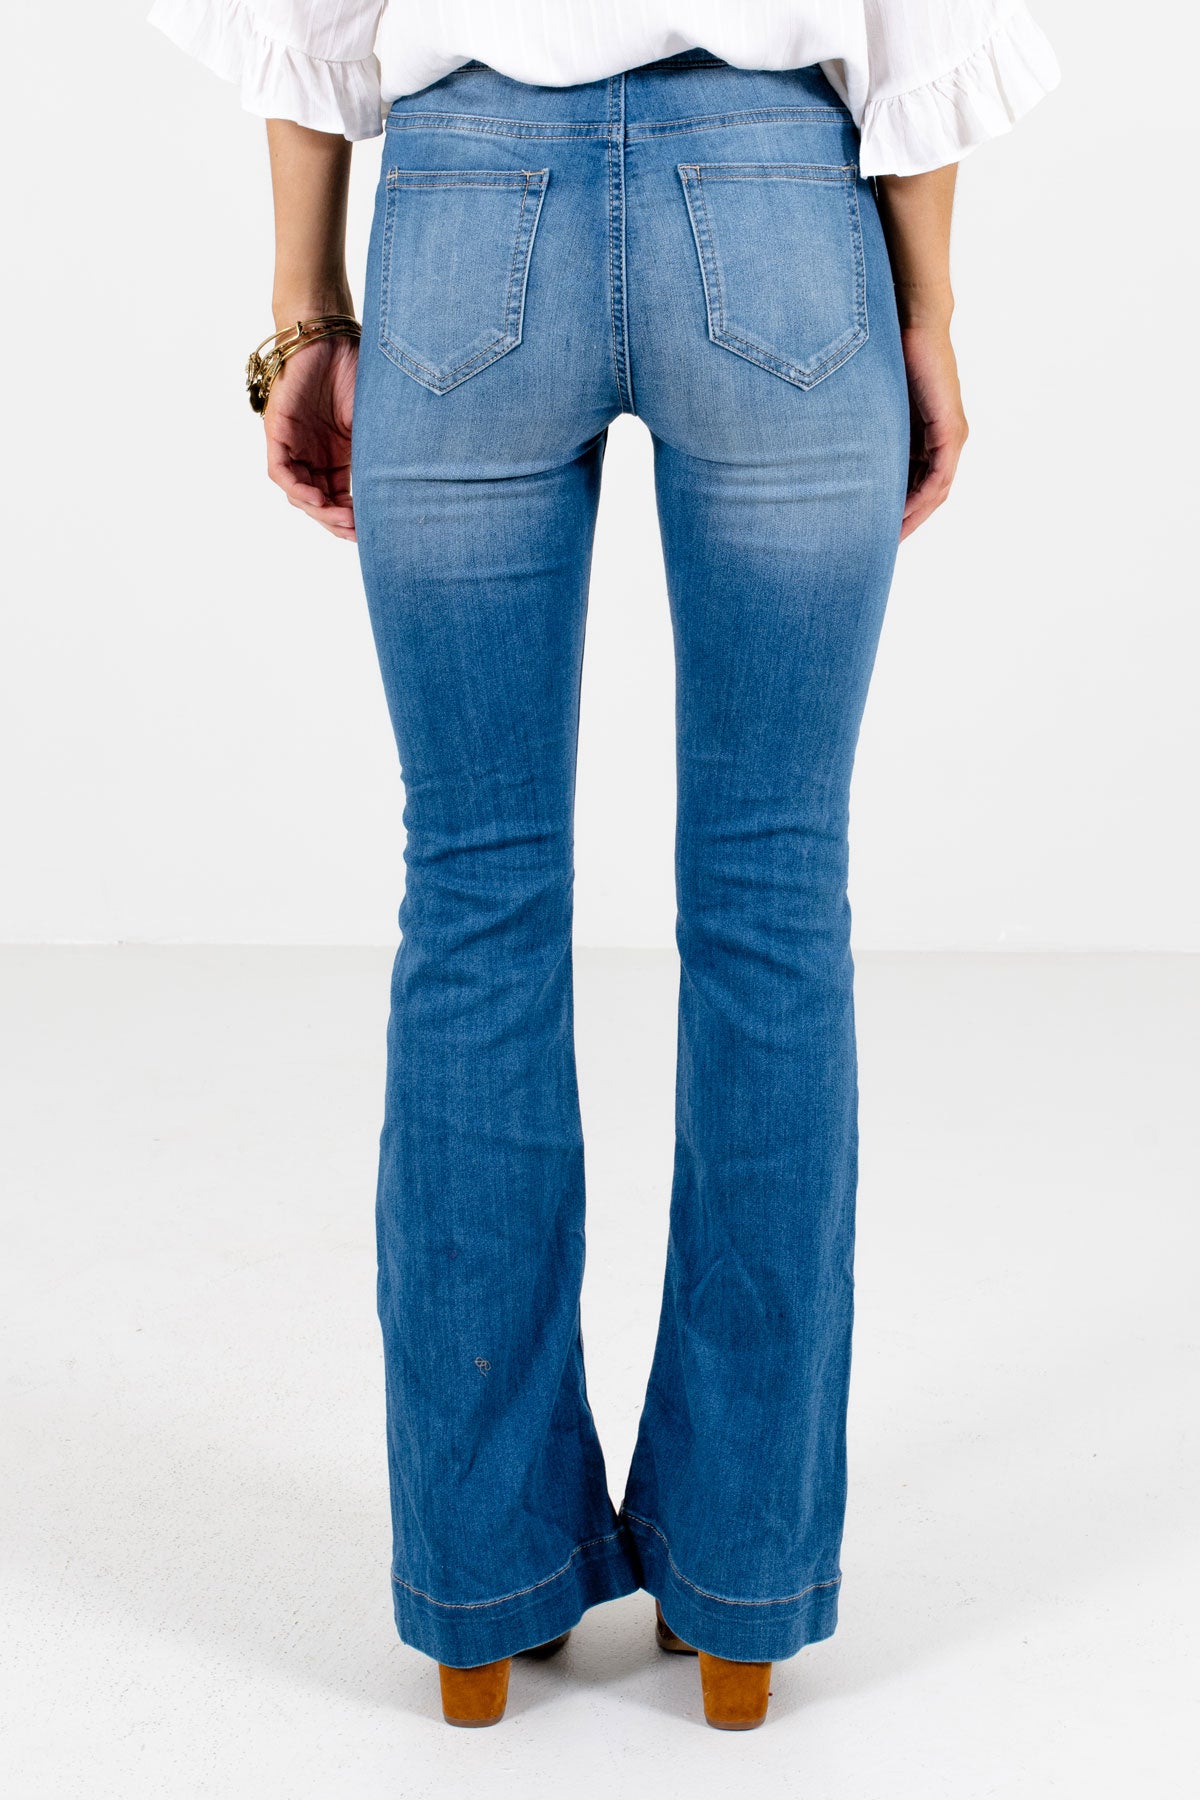 Women's Blue Flare Style Boutique Jeggings